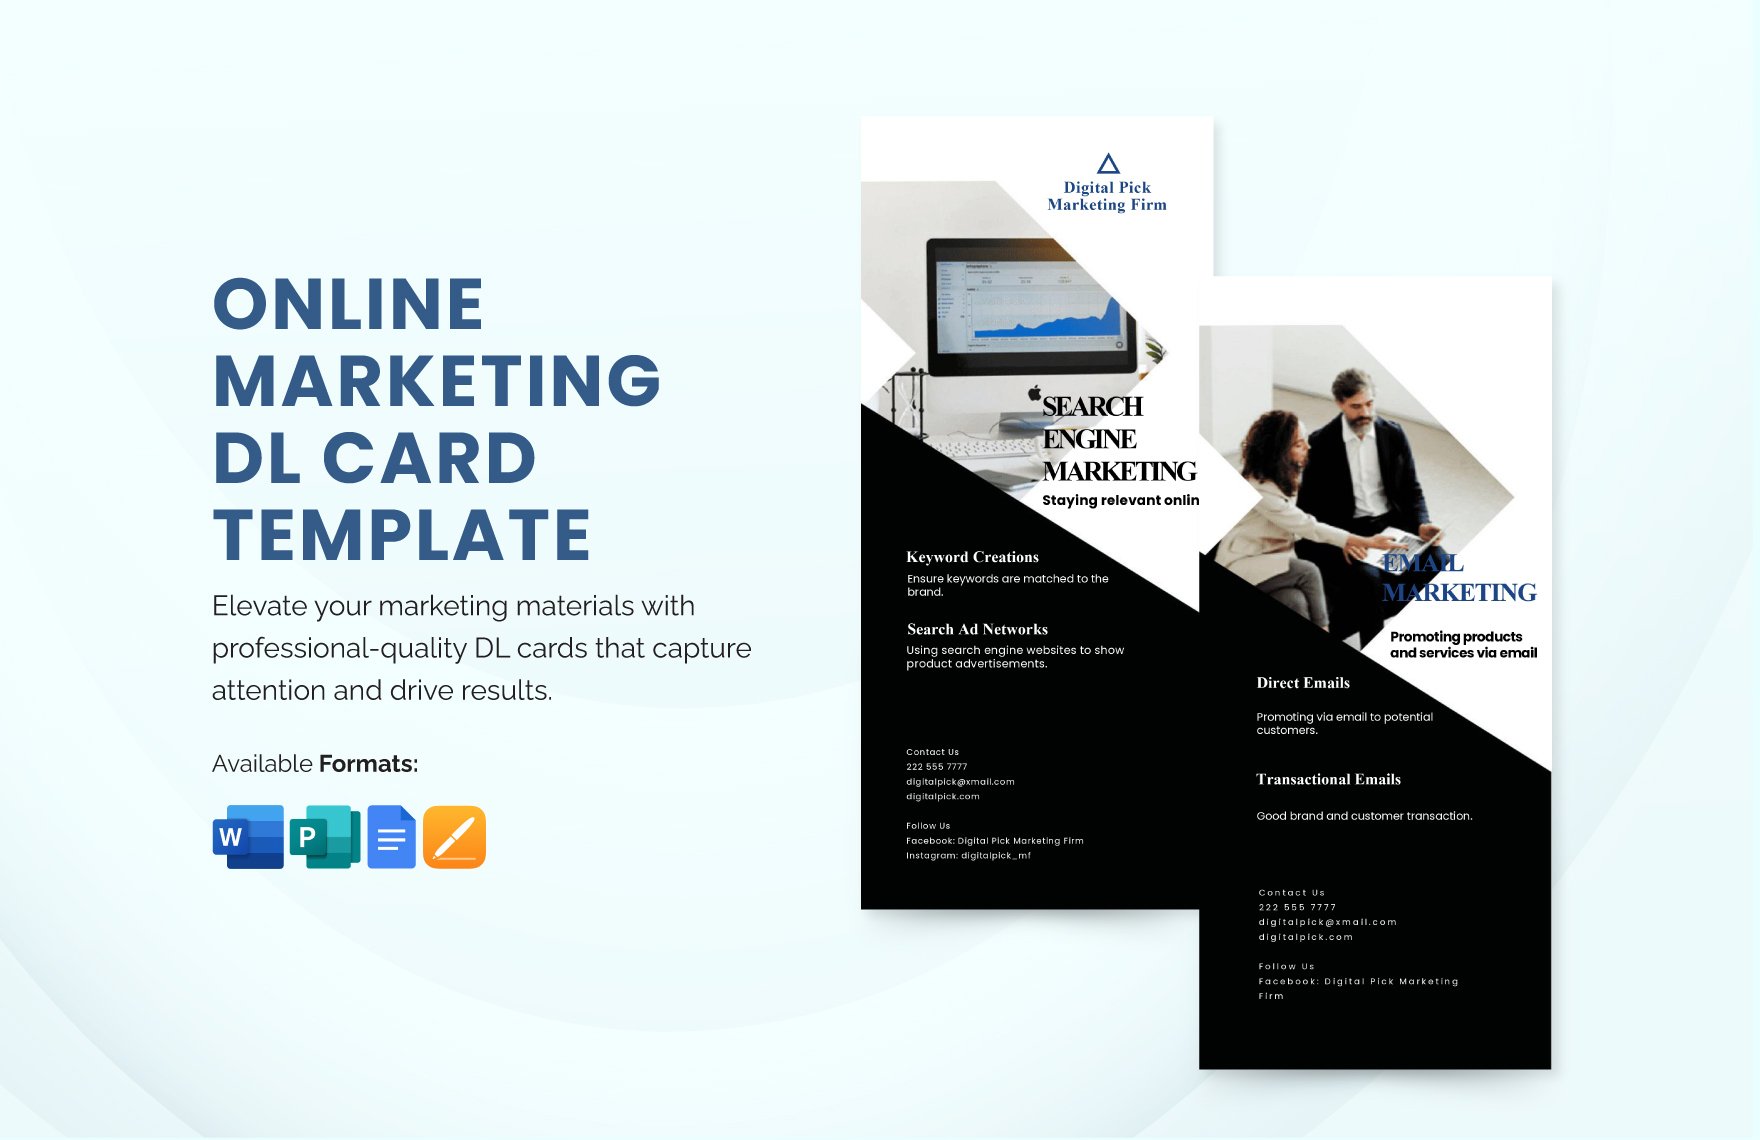 Online Marketing DL Card Template in Word, Google Docs, Apple Pages, Publisher